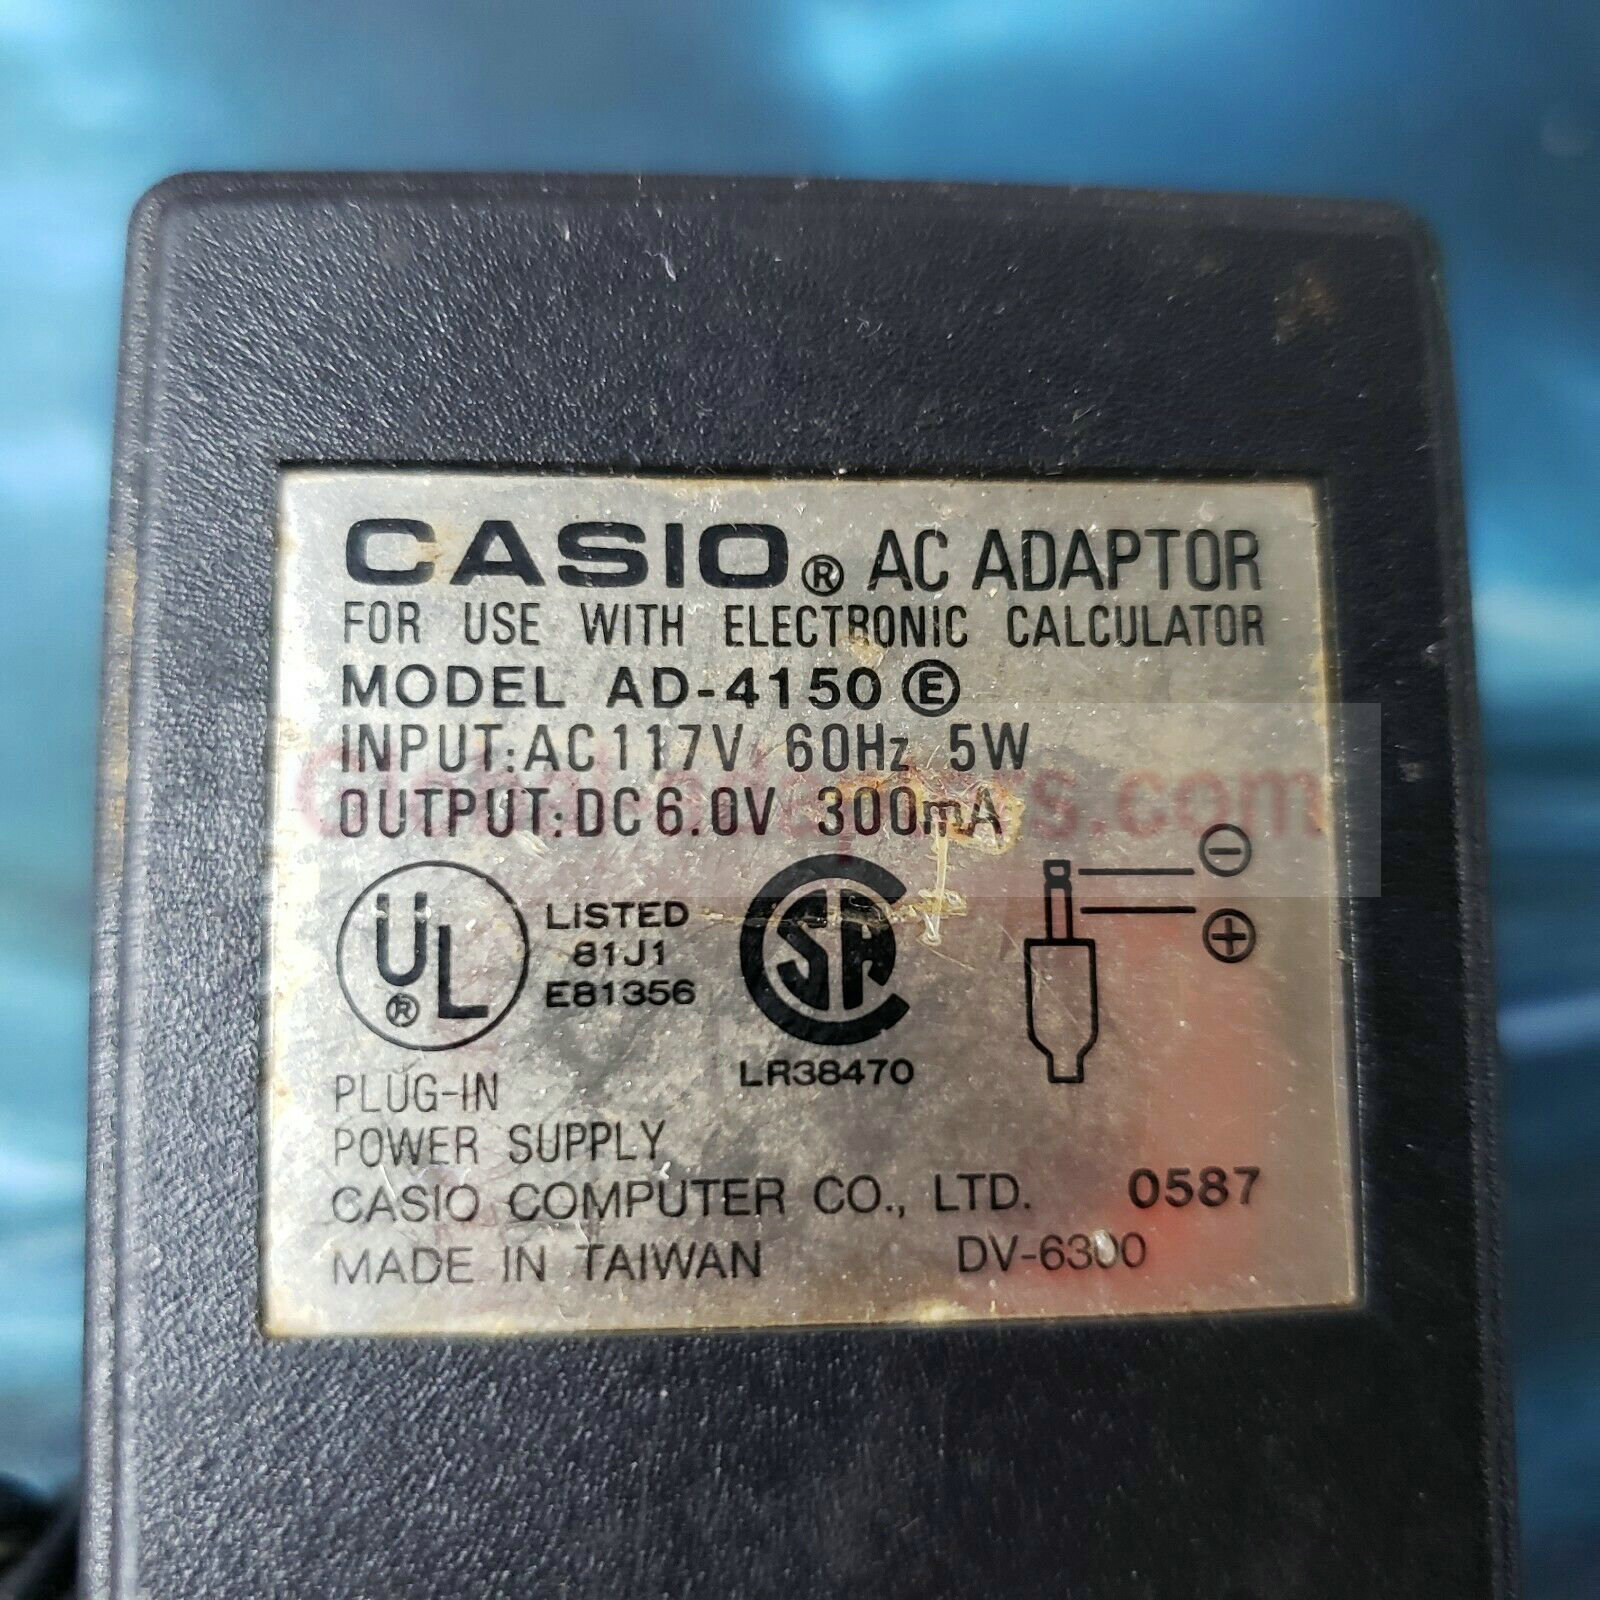 New 6V 300mA Casio AD-4150 Power Supply Ac Adapter